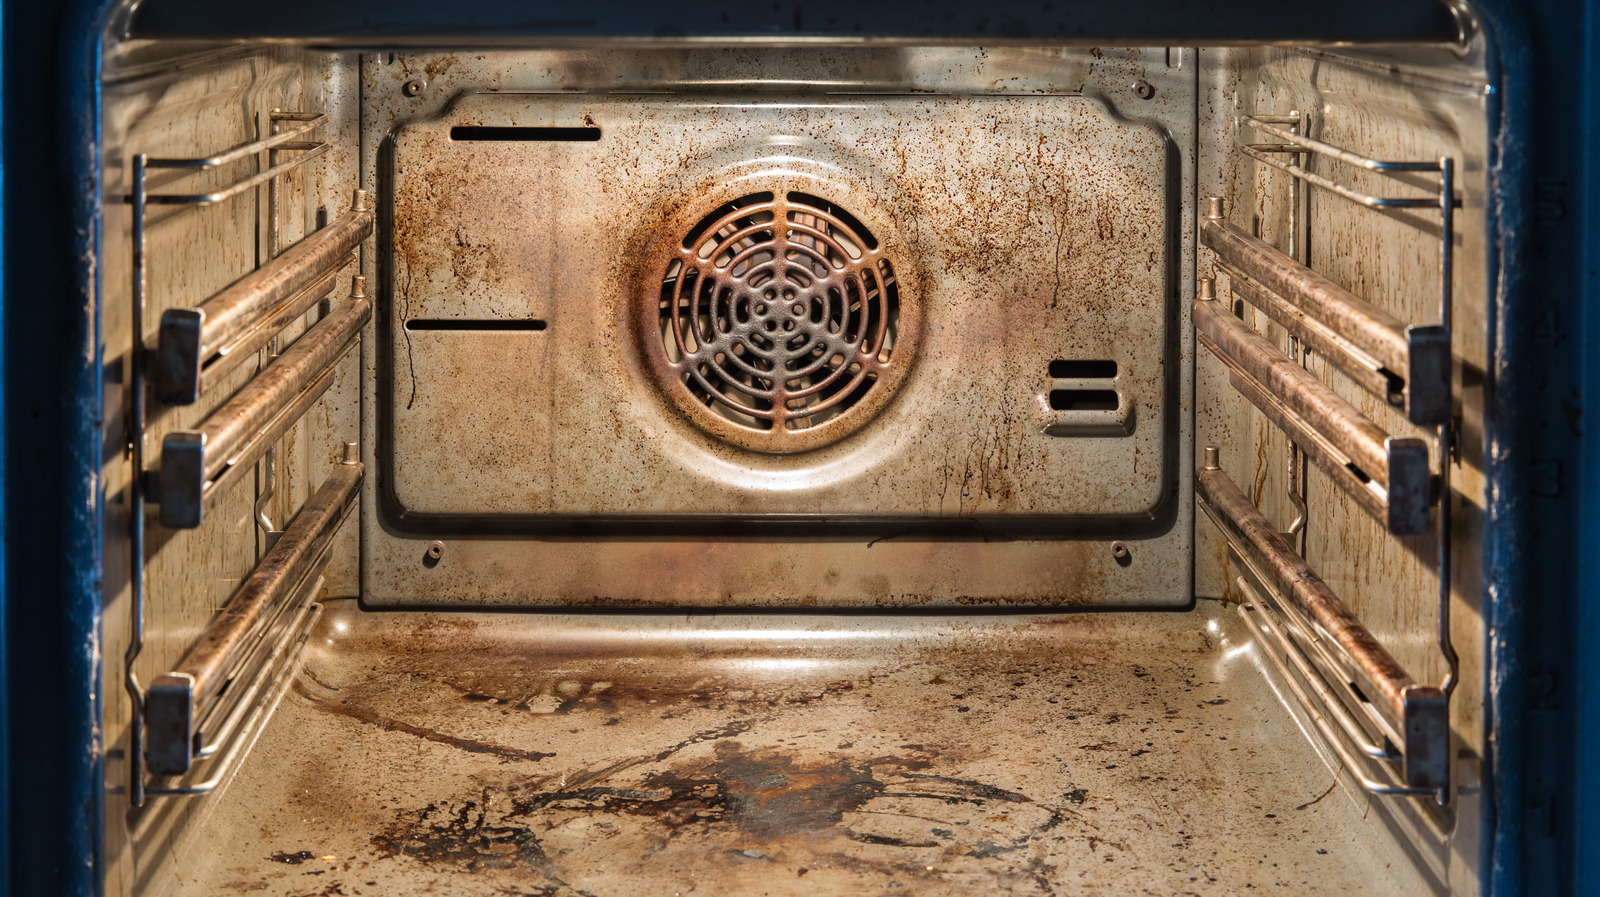 How To Clean Your Oven - Staples®